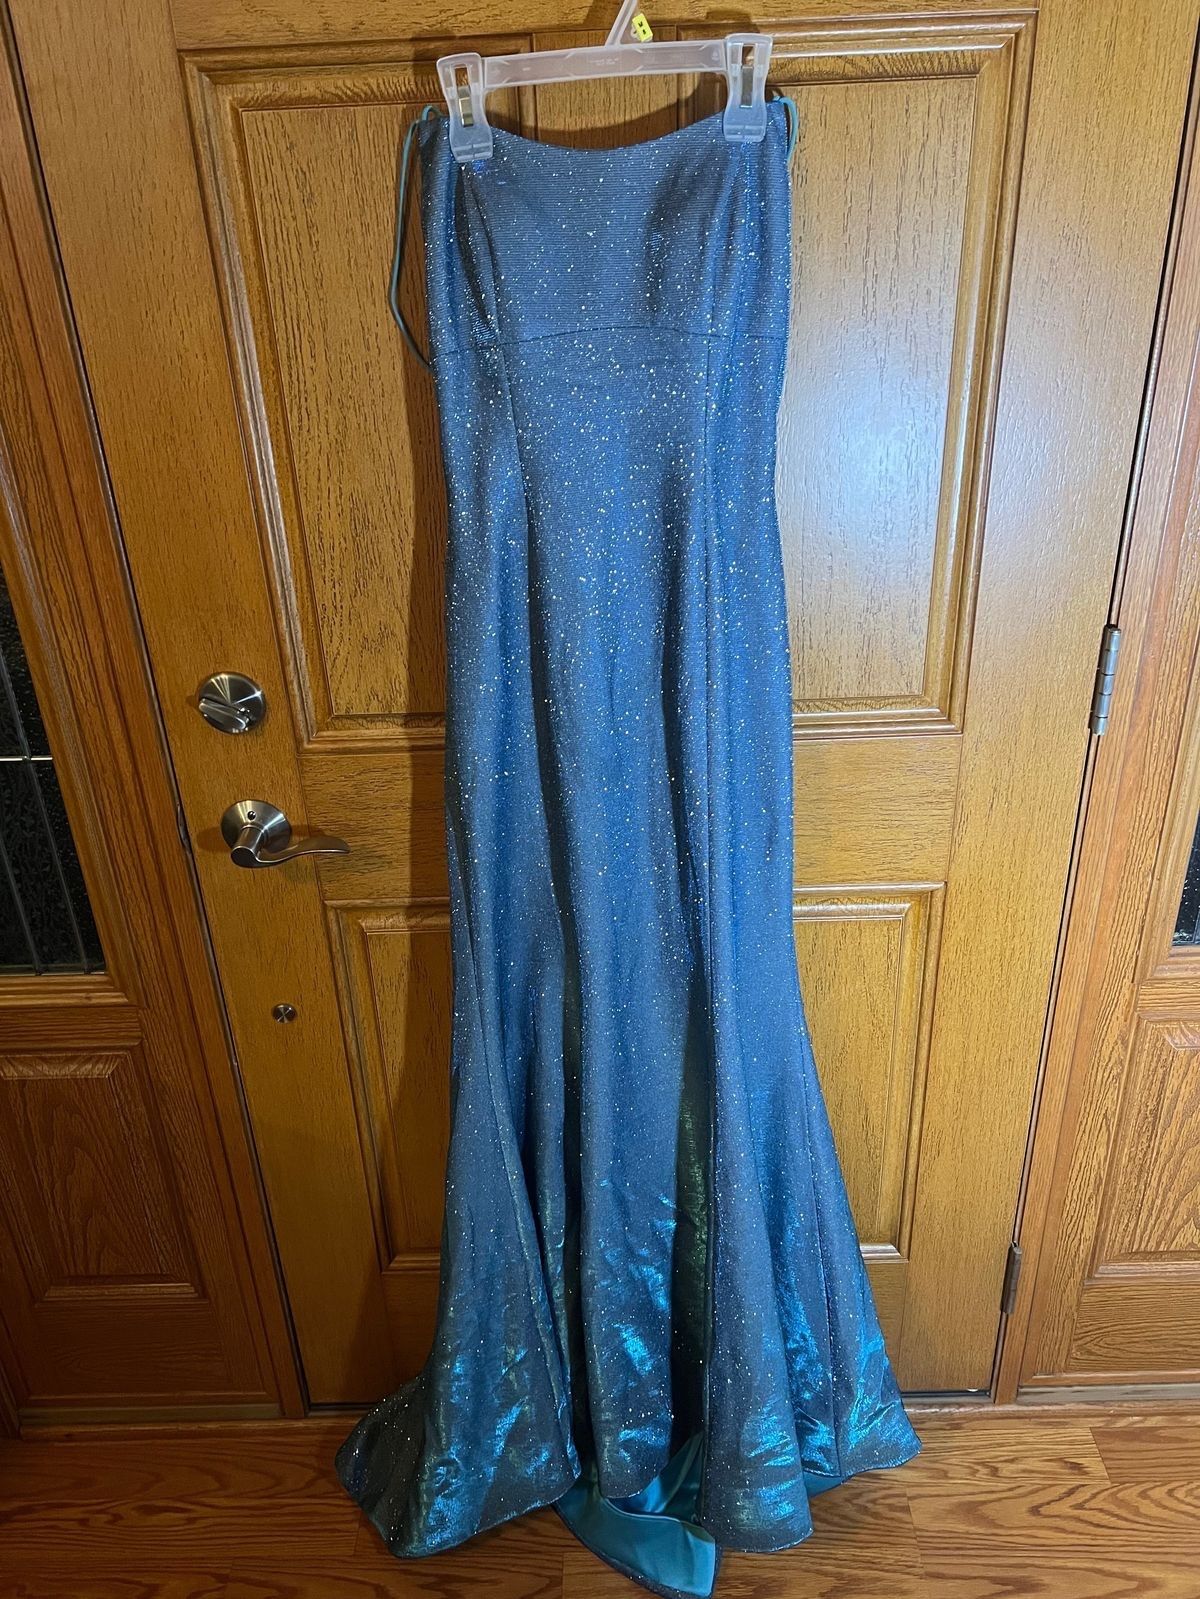 Sherri Hill Size S Prom Blue Mermaid Dress on Queenly